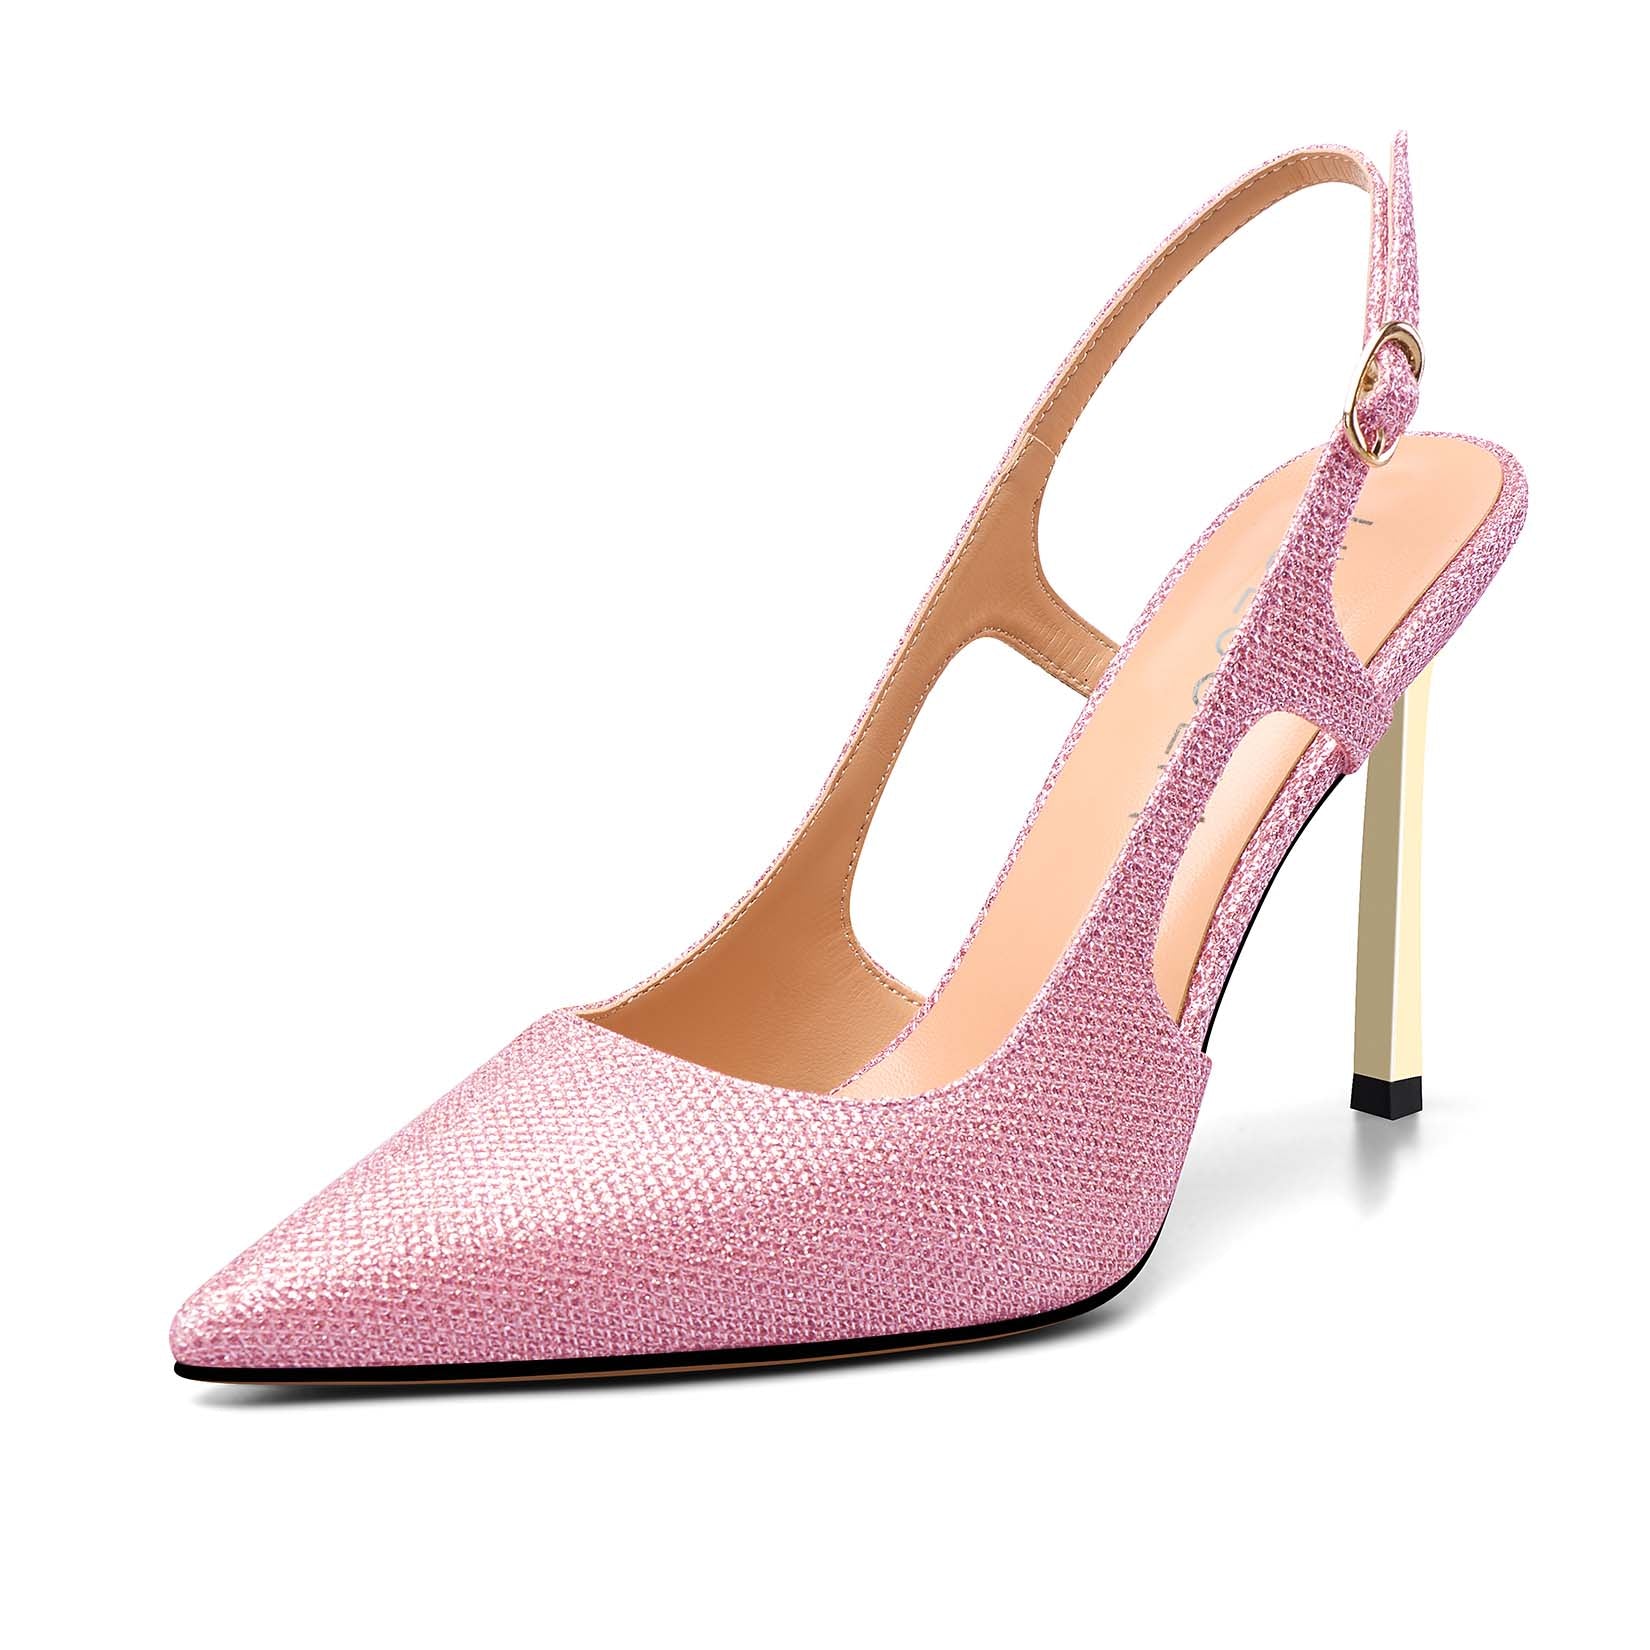 Women 8.5CM Stiletto Heel Slingback Pumps with Pointed-Toe, Dress Shiny and Stylish Bling Slip-on Shoes